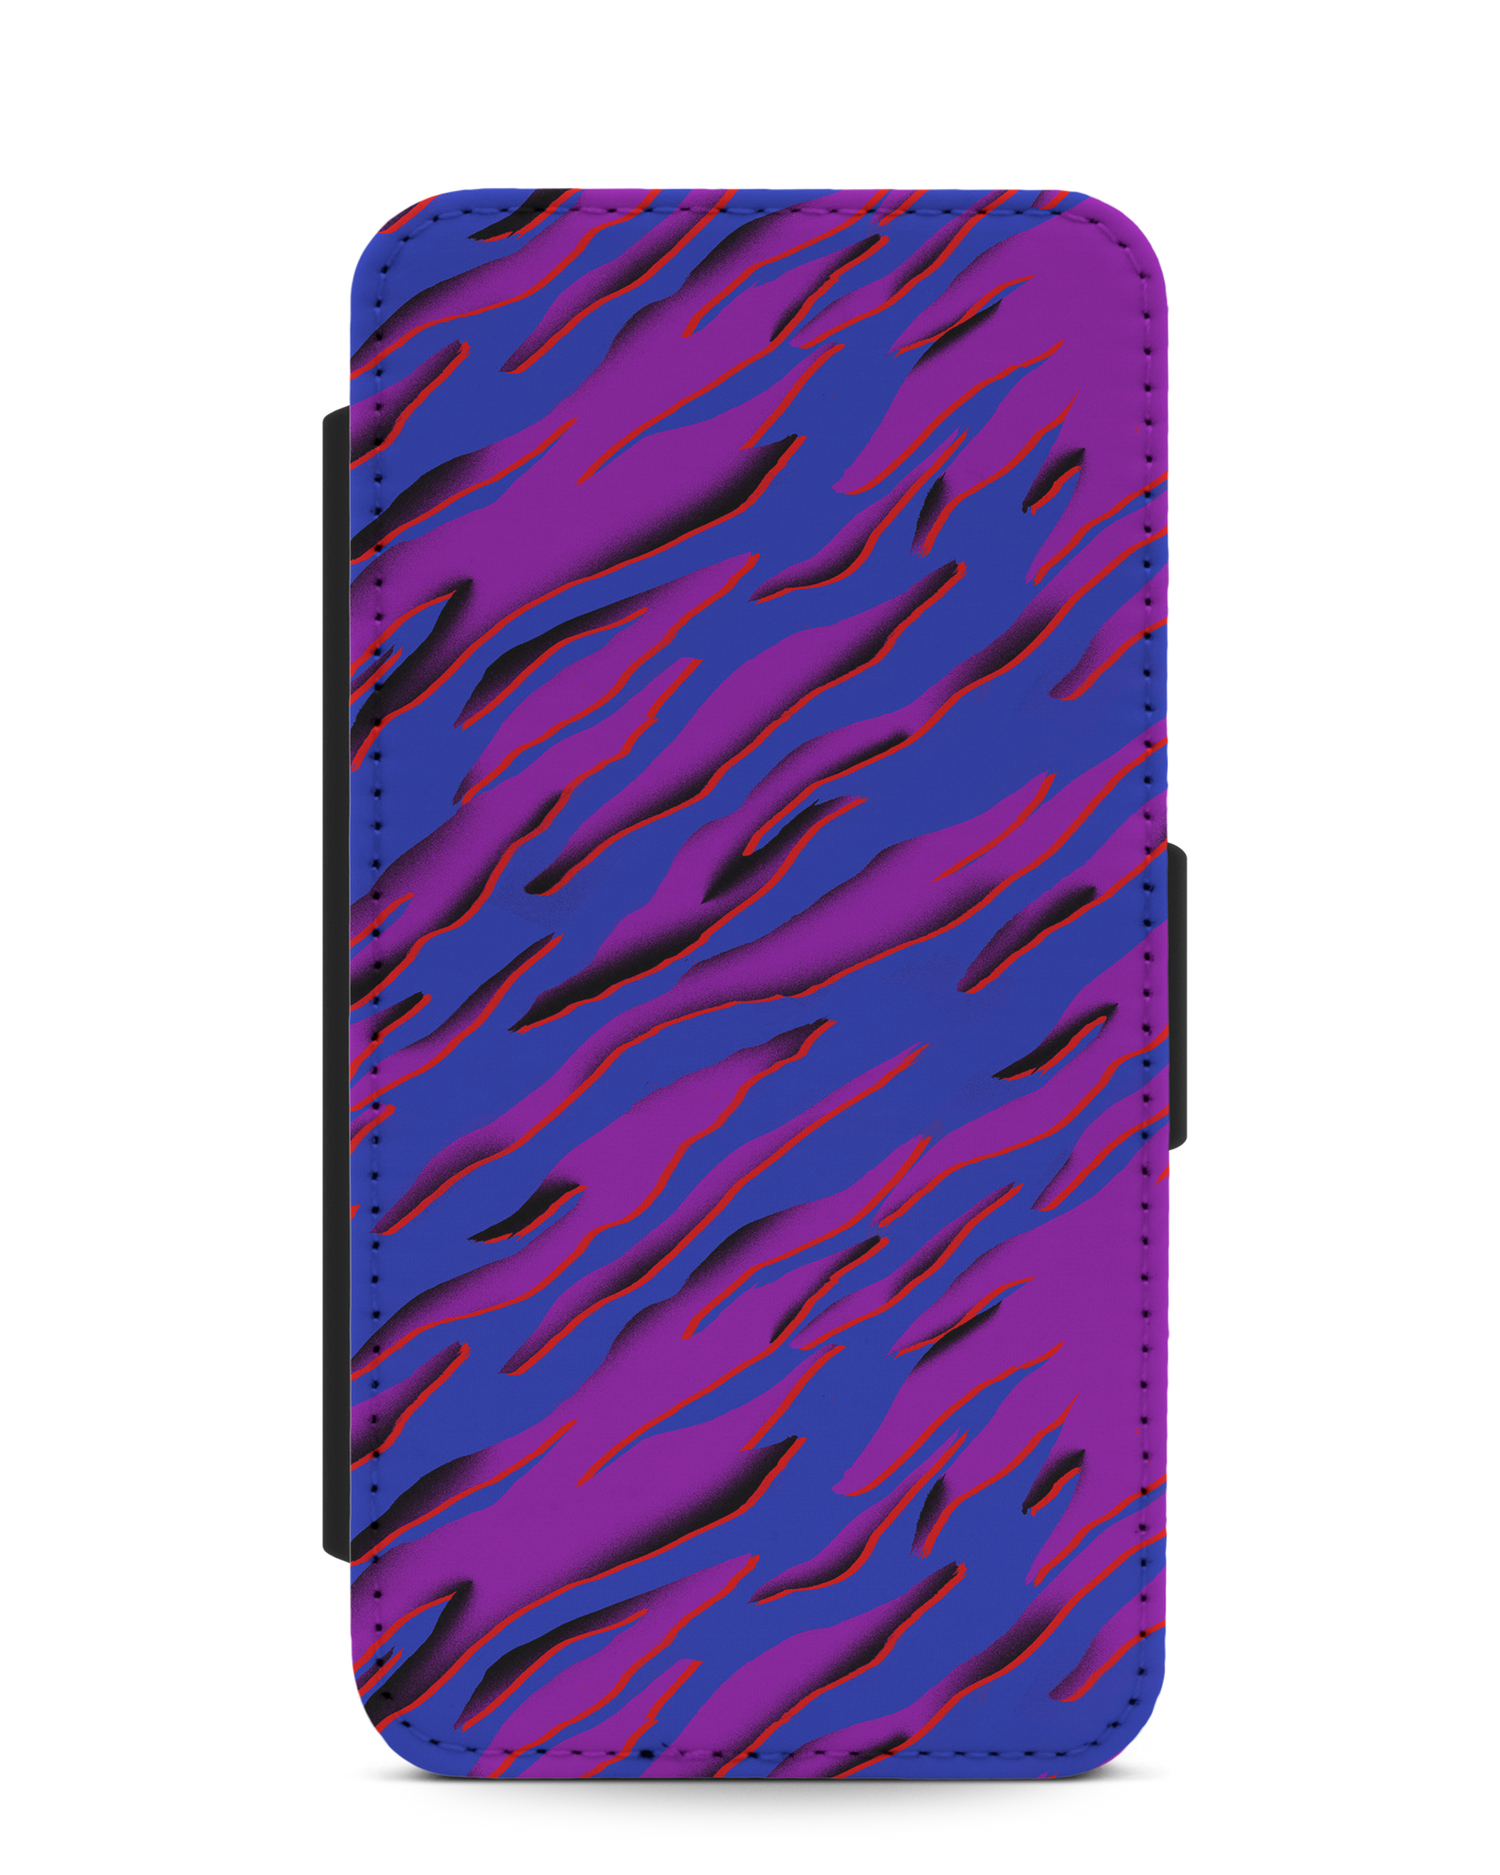 Electric Ocean 2 Wallet Phone Case Samsung Galaxy S10e: Front View